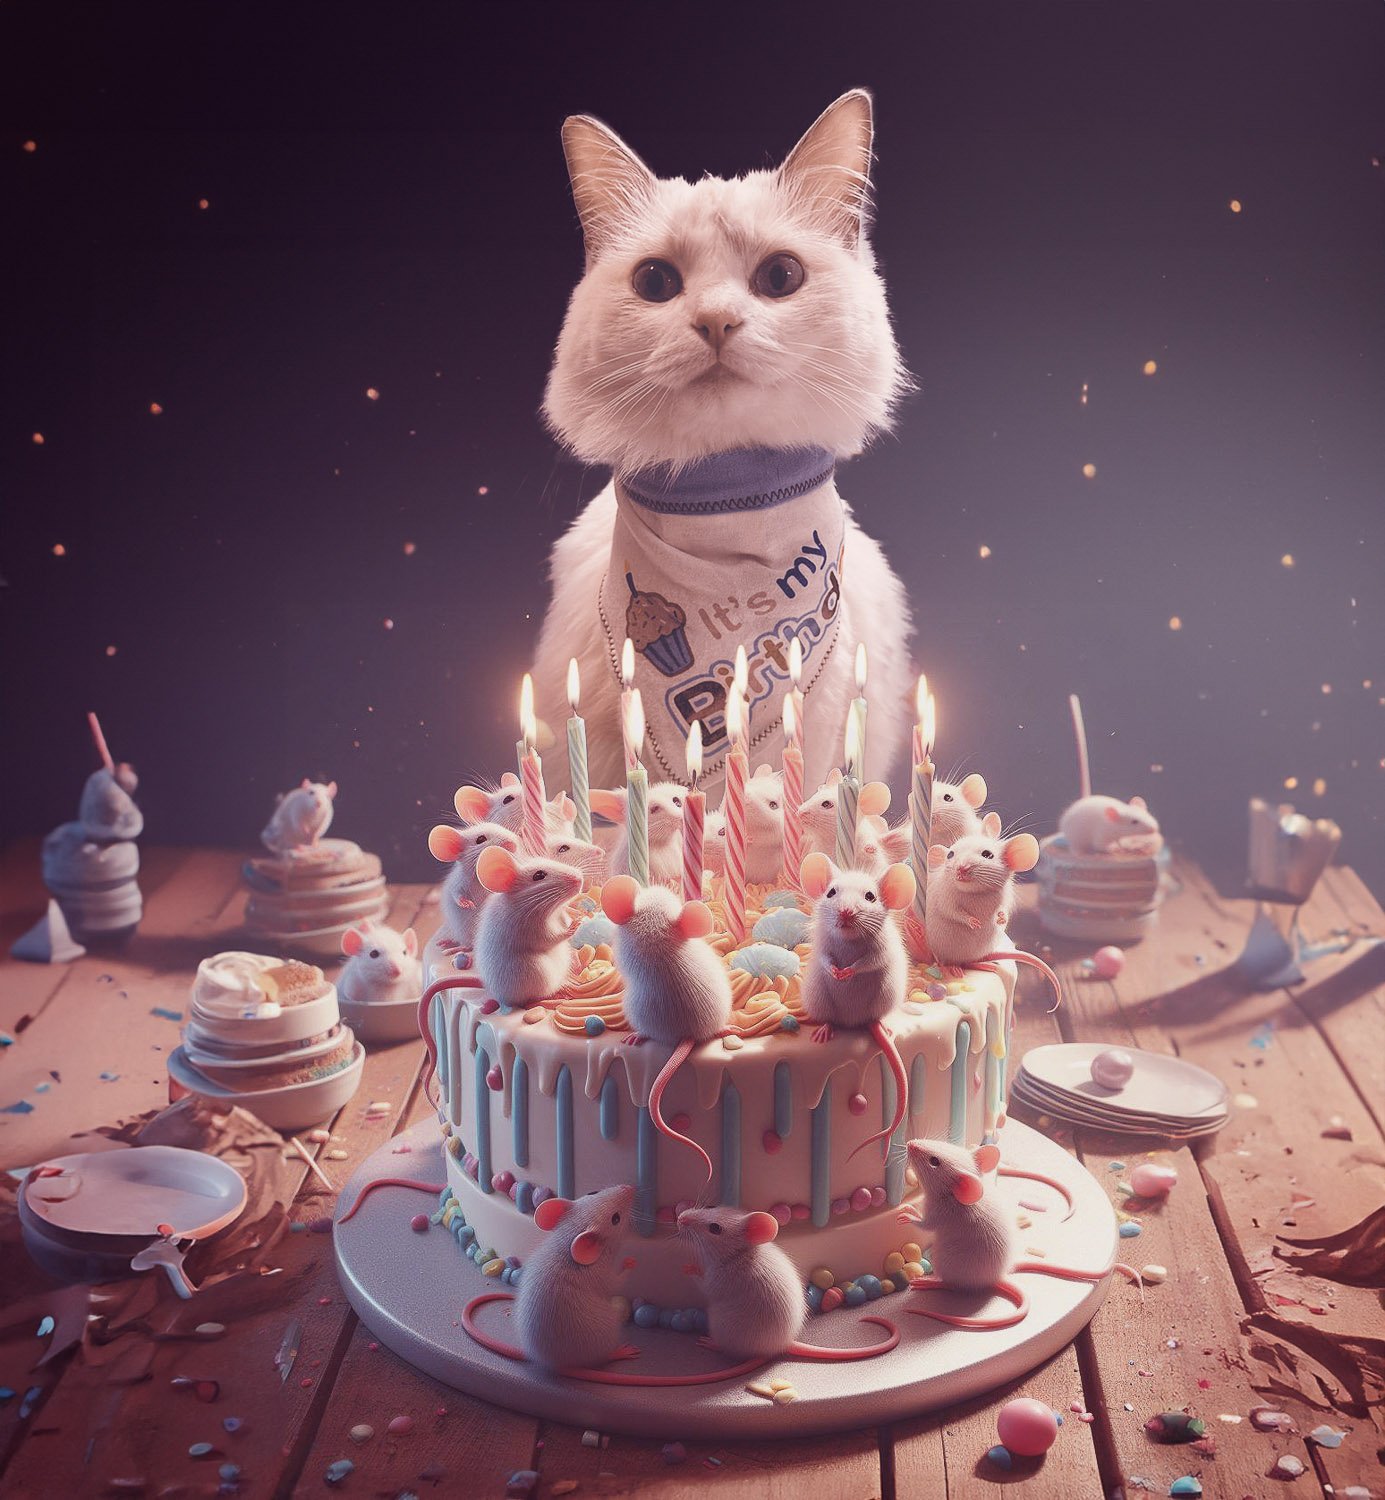 A white cat sitting behind a mouse decorated birthday cake with glowing candles  